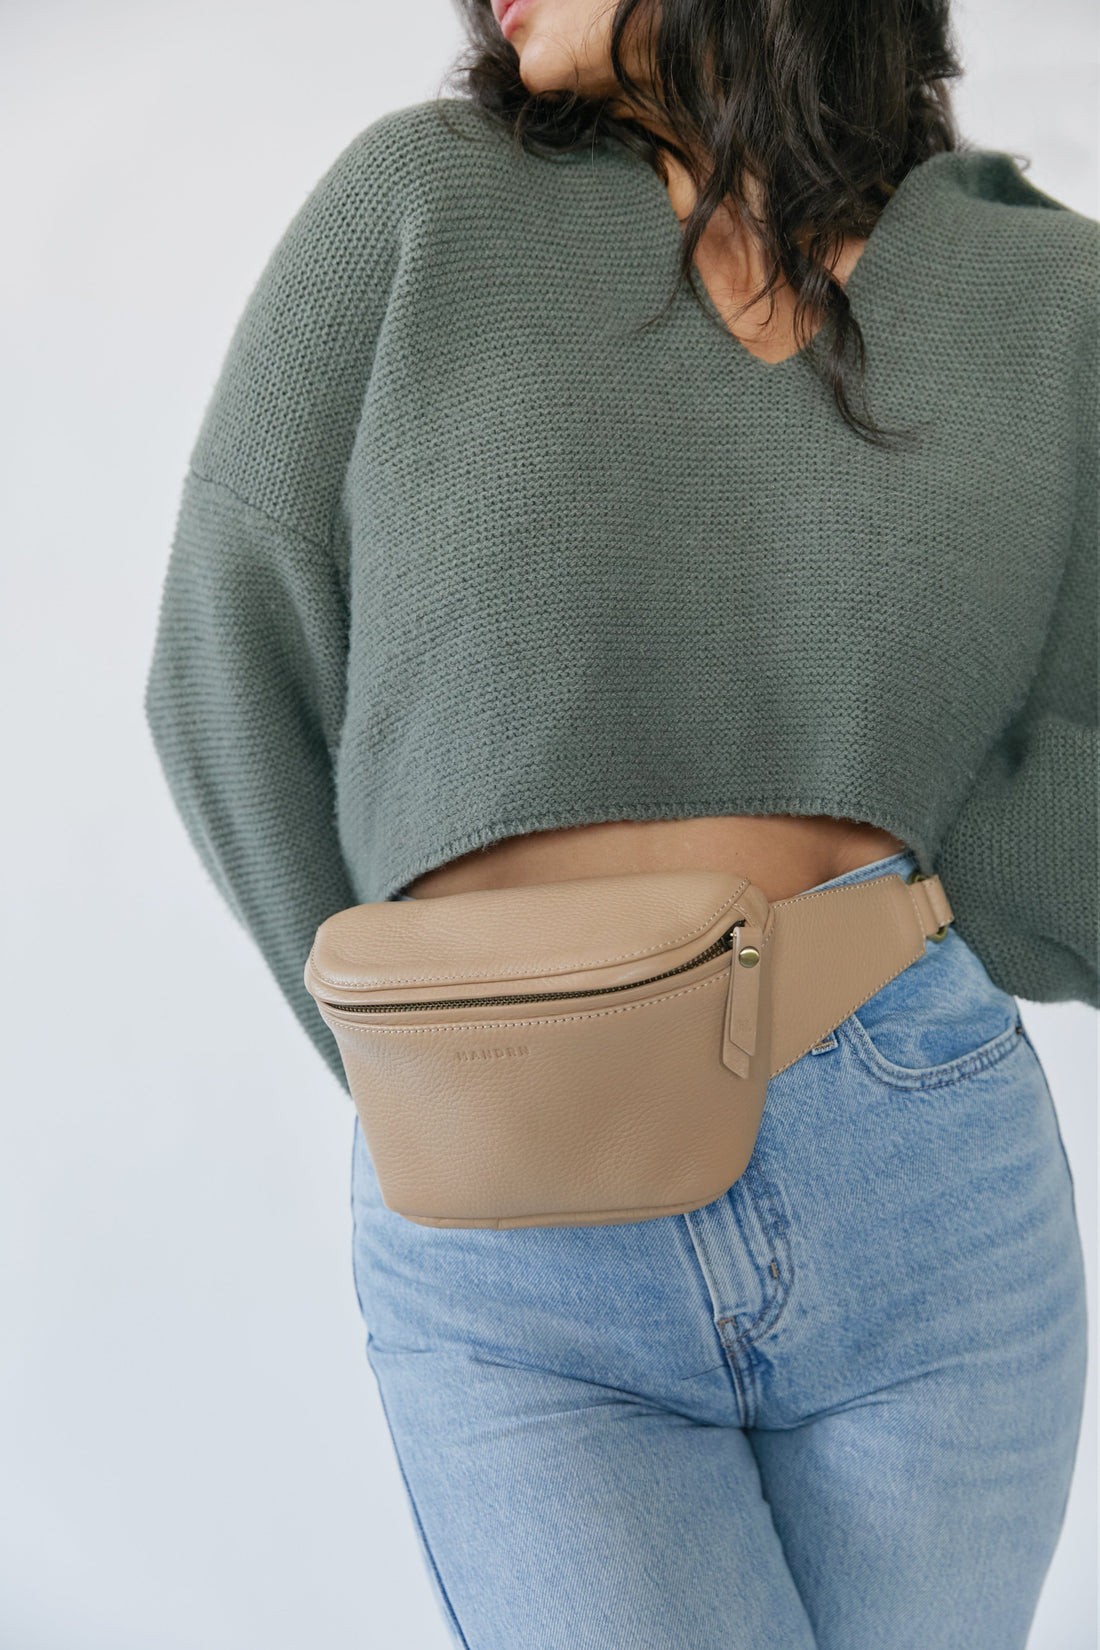 MANDRN  The Woven Remy- Black Leather Fanny Pack